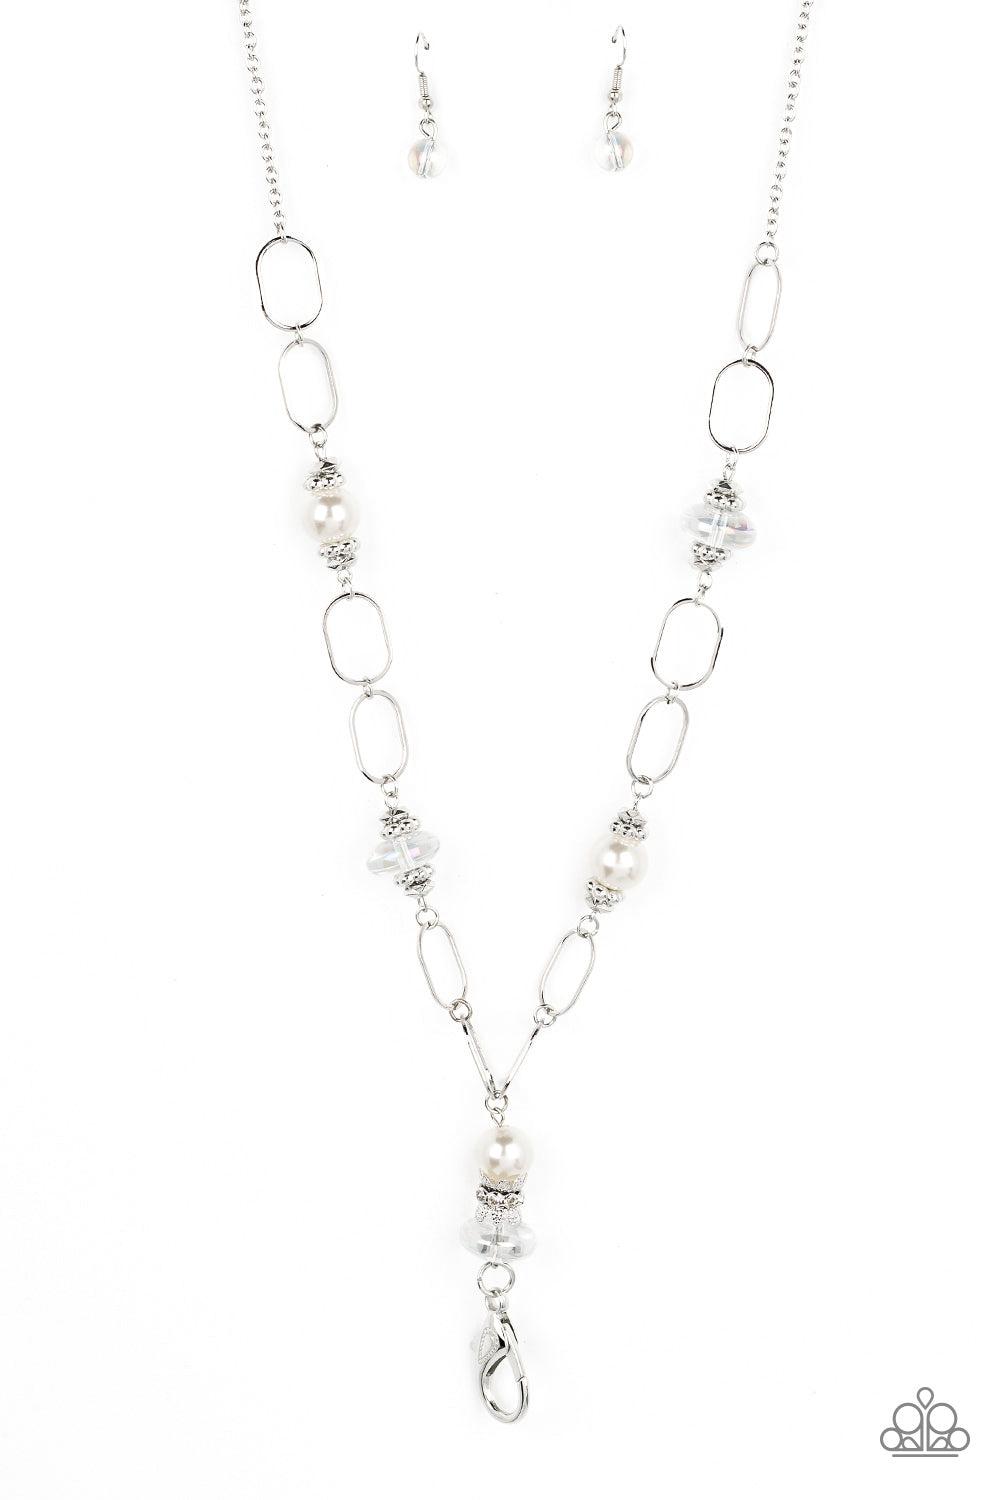 Creative Couture White Pearl &amp; Iridescent Lanyard Necklace - Paparazzi Accessories- lightbox - CarasShop.com - $5 Jewelry by Cara Jewels